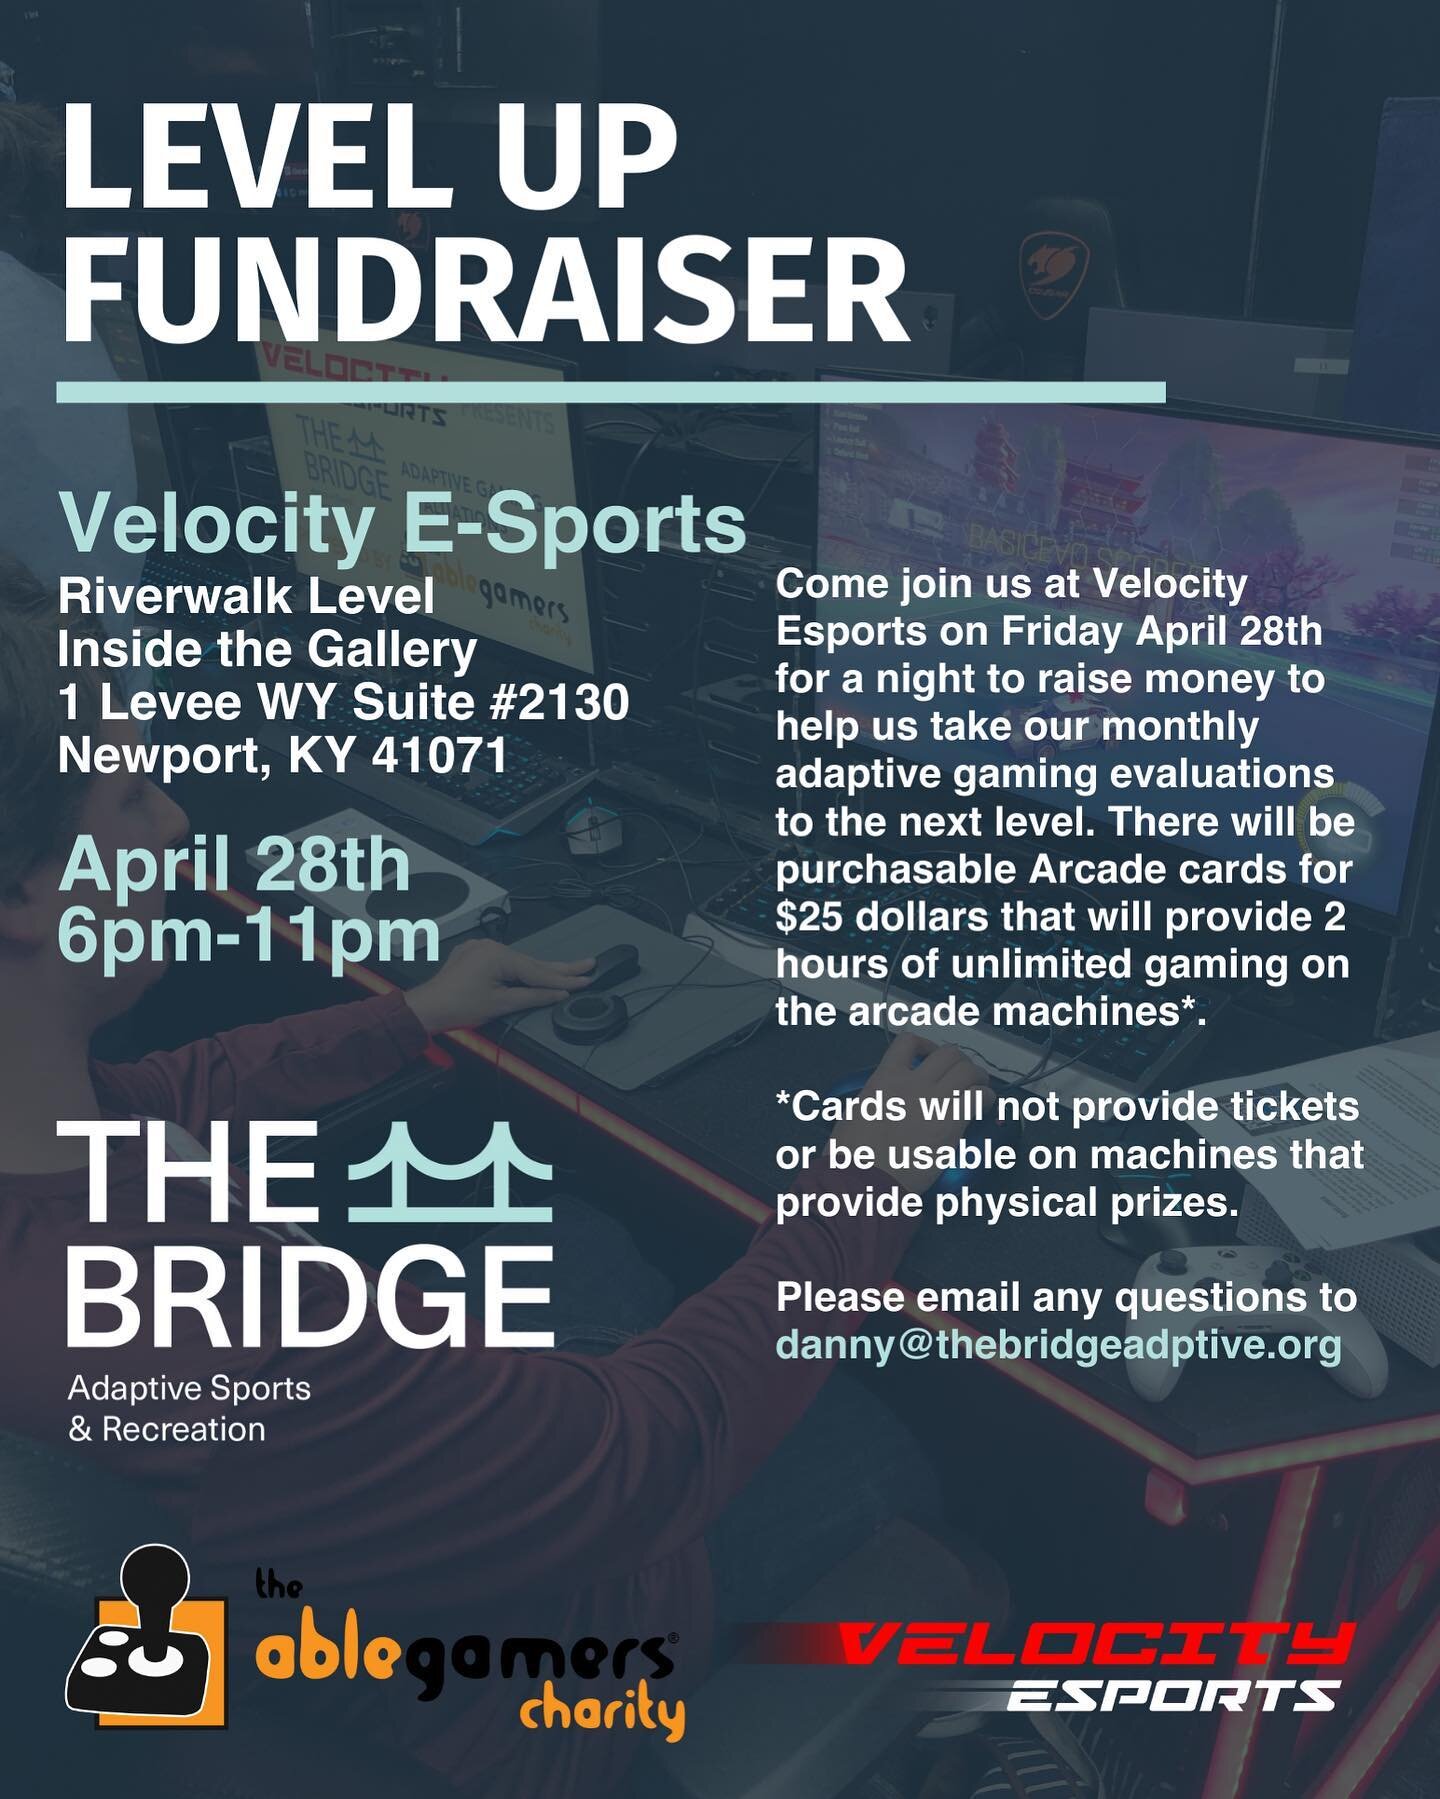 Don&rsquo;t miss out on a night filled with unlimited gaming, all for charity! Join us at @velocityesportsinc tomorrow night to help fundraise for the @thebridgeadaptive organization so we can raise money for the local adaptive gaming program! Hope t